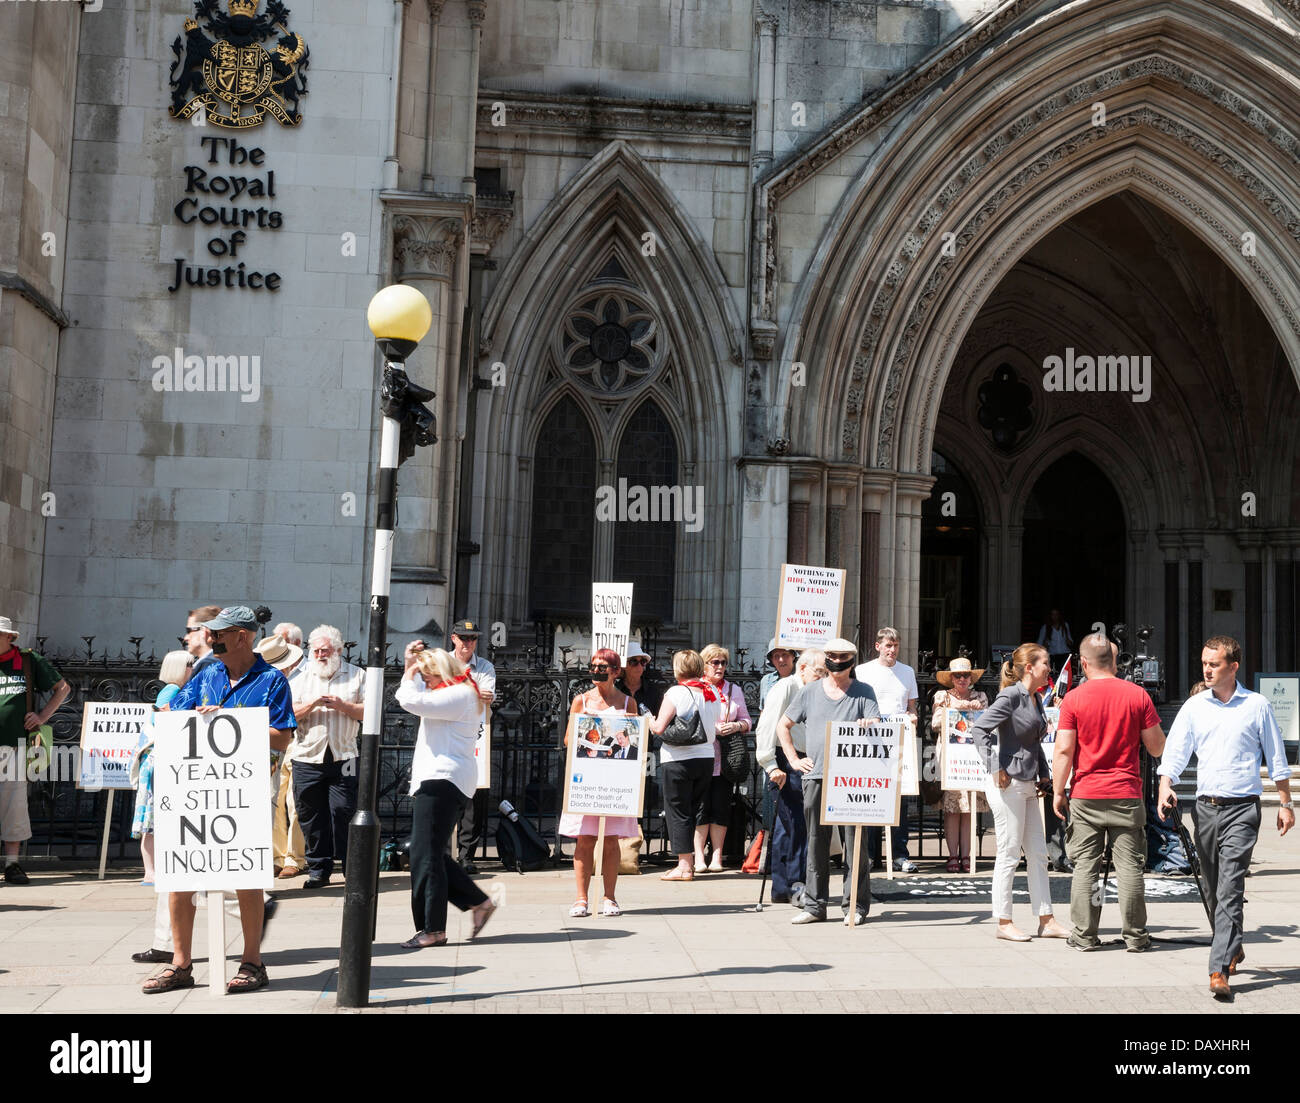 Group of supporters rally for justice for Dr David Kelly on tenth anniversary of his death outside Royal Courts of Justice, UK Stock Photo